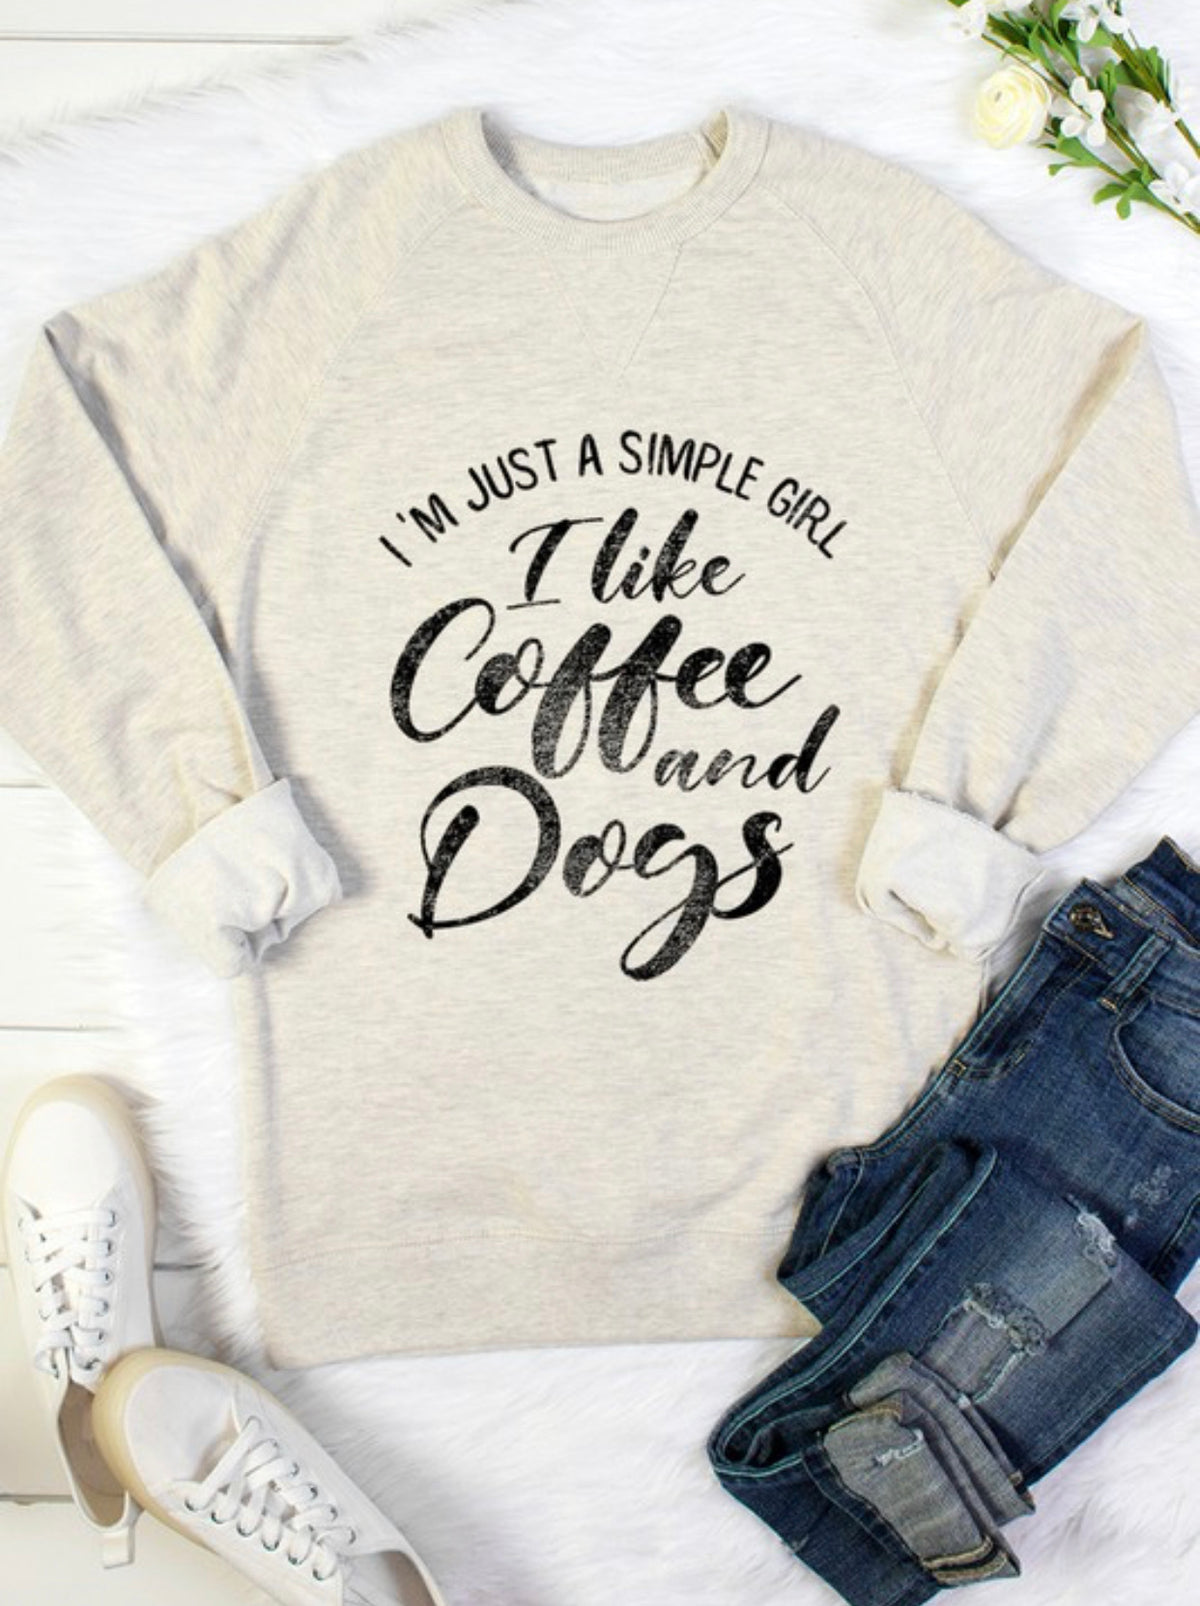 Dogs and Coffee Crew